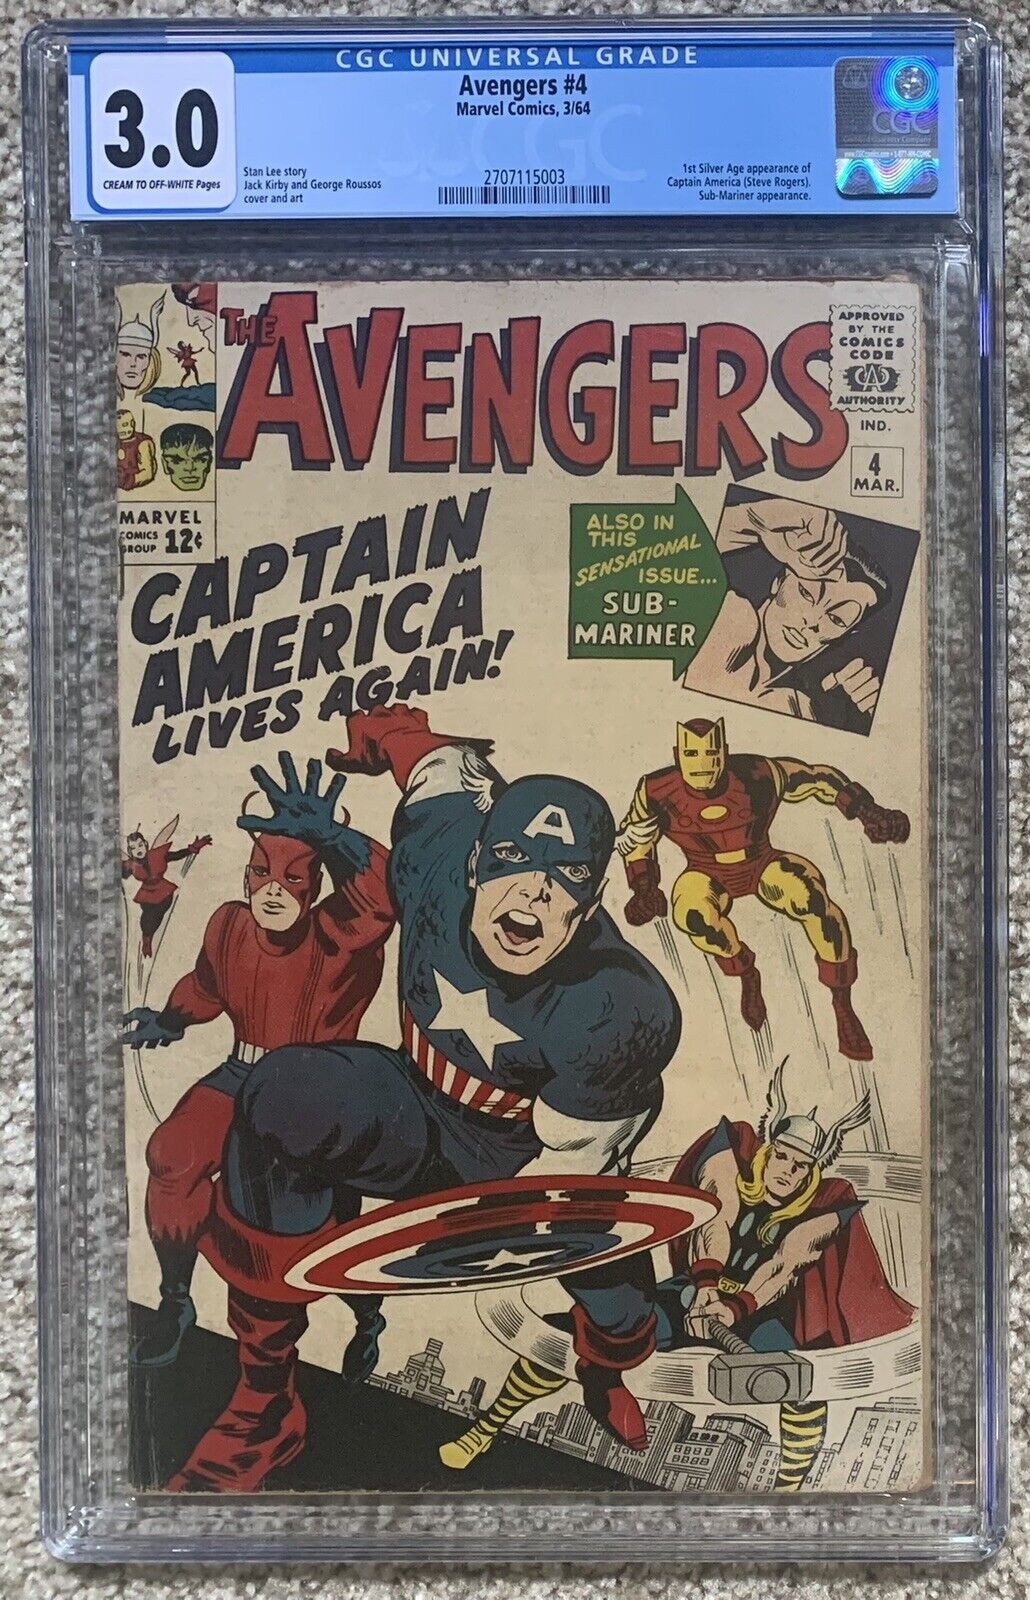 CGC 3.0 THE AVENGERS #4 (MARVEL,1964) 1ST SILVER AGE CAPTAIN AMERICA